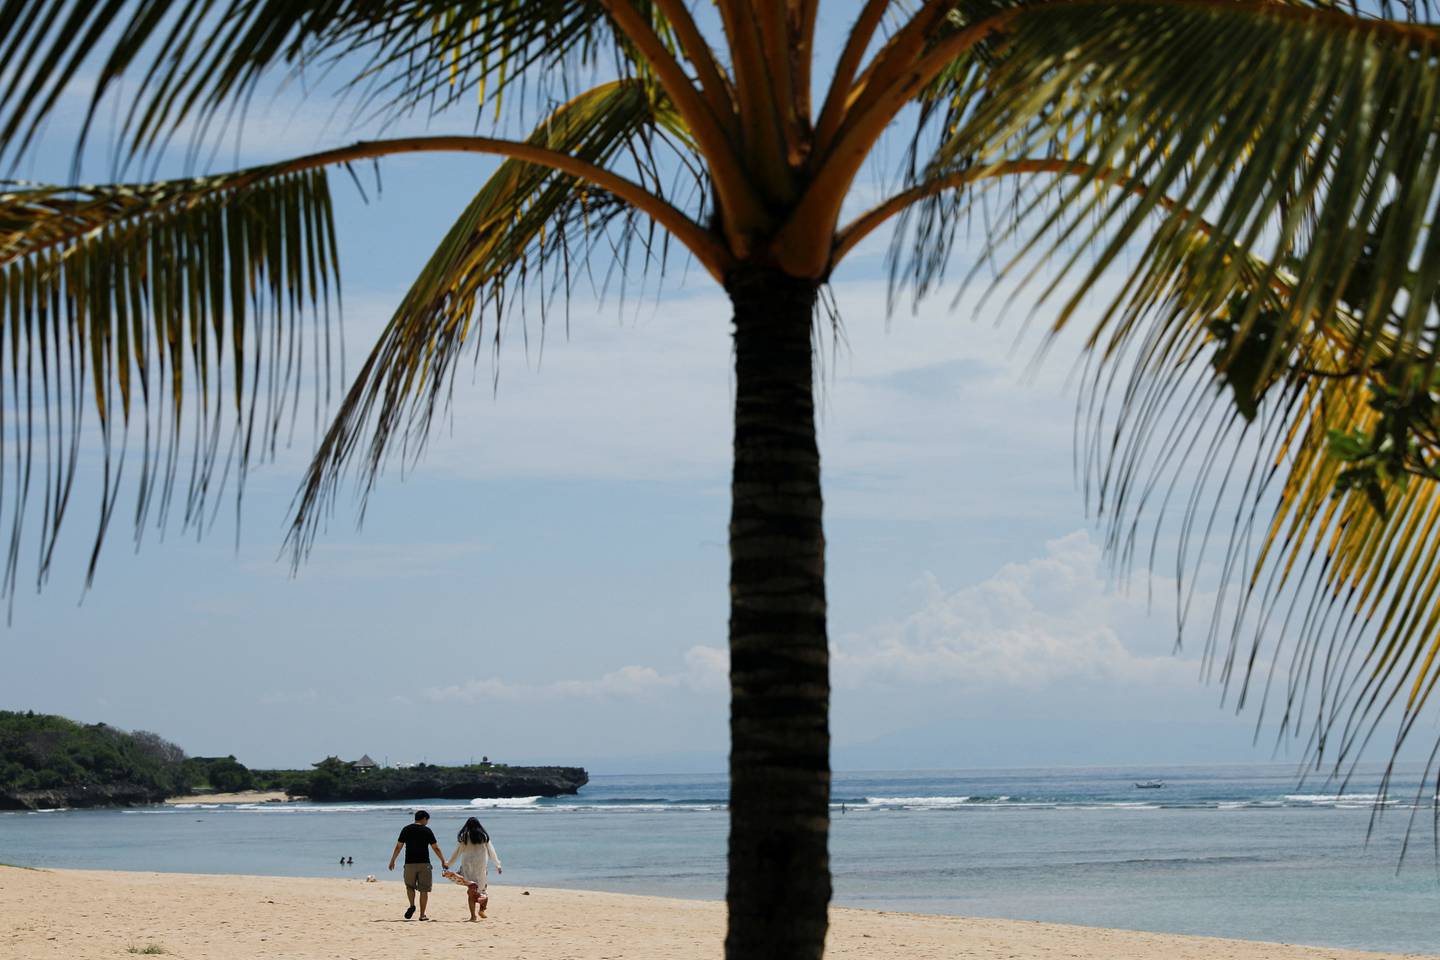 A couple walk along the beach in Nusa Dua, Bali. It is hoped the G20 summit will help persuade tourists to return to the island. Reuters